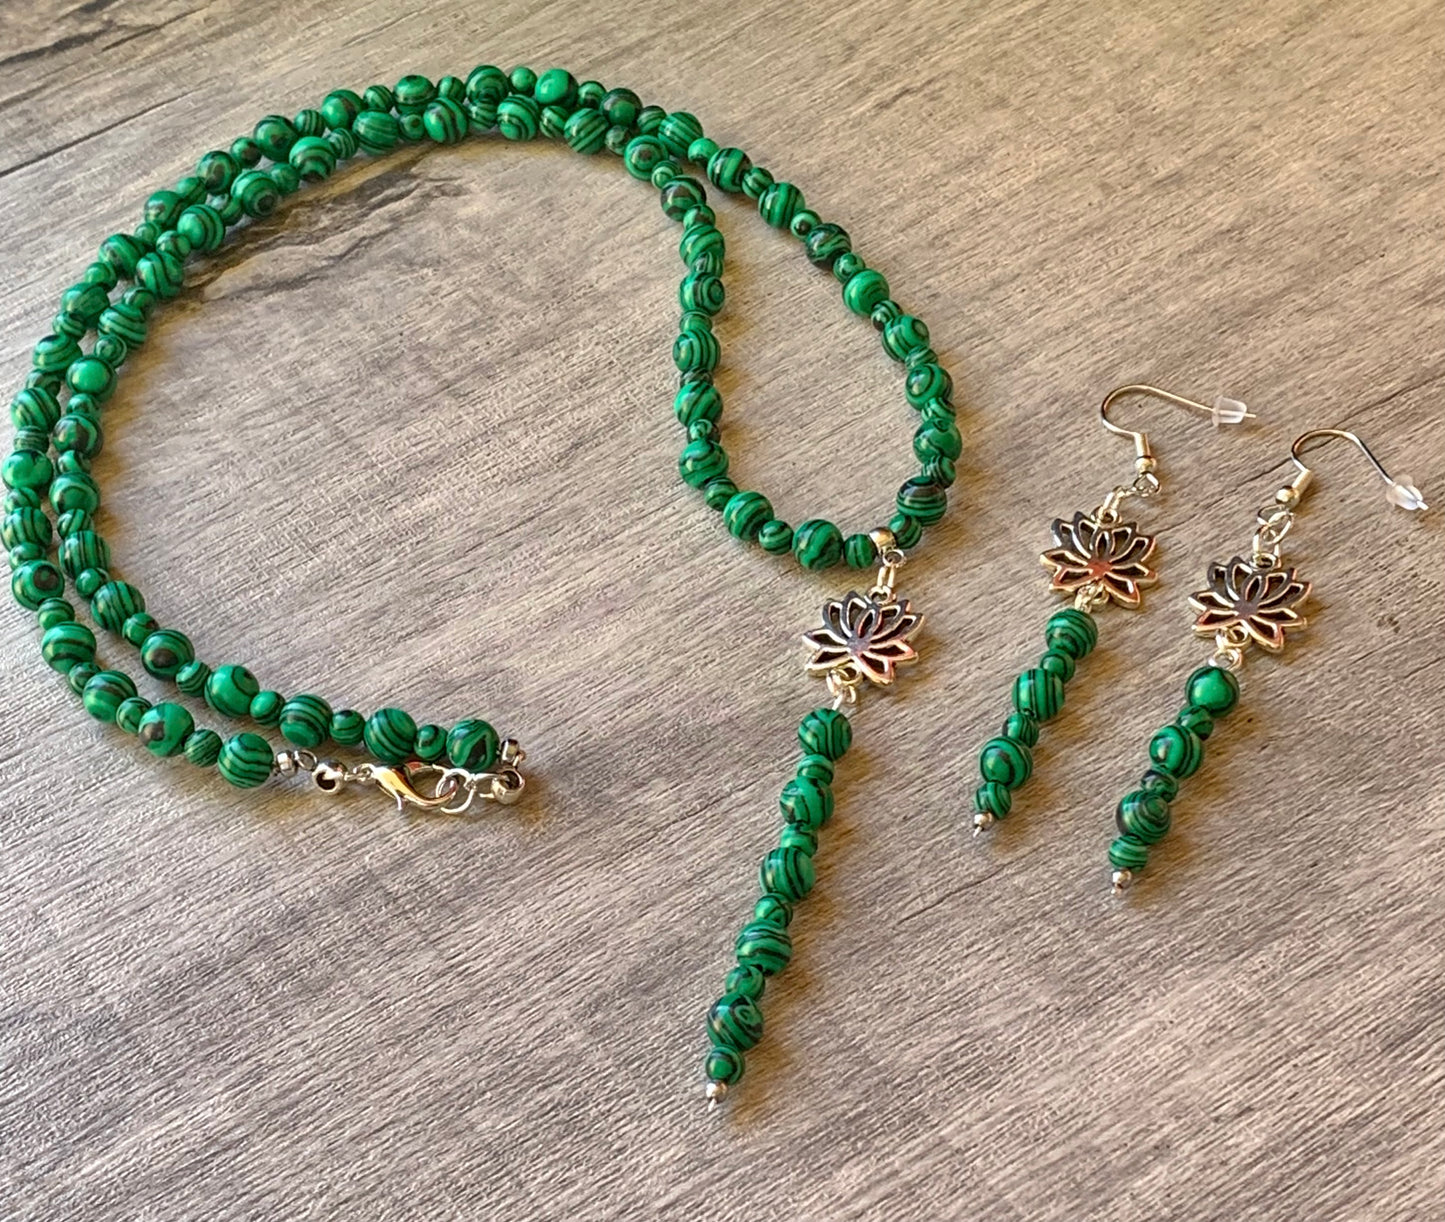 Aurora Handmade Malachite 23" Necklace and Earring Set with Lotus Flower Pendant